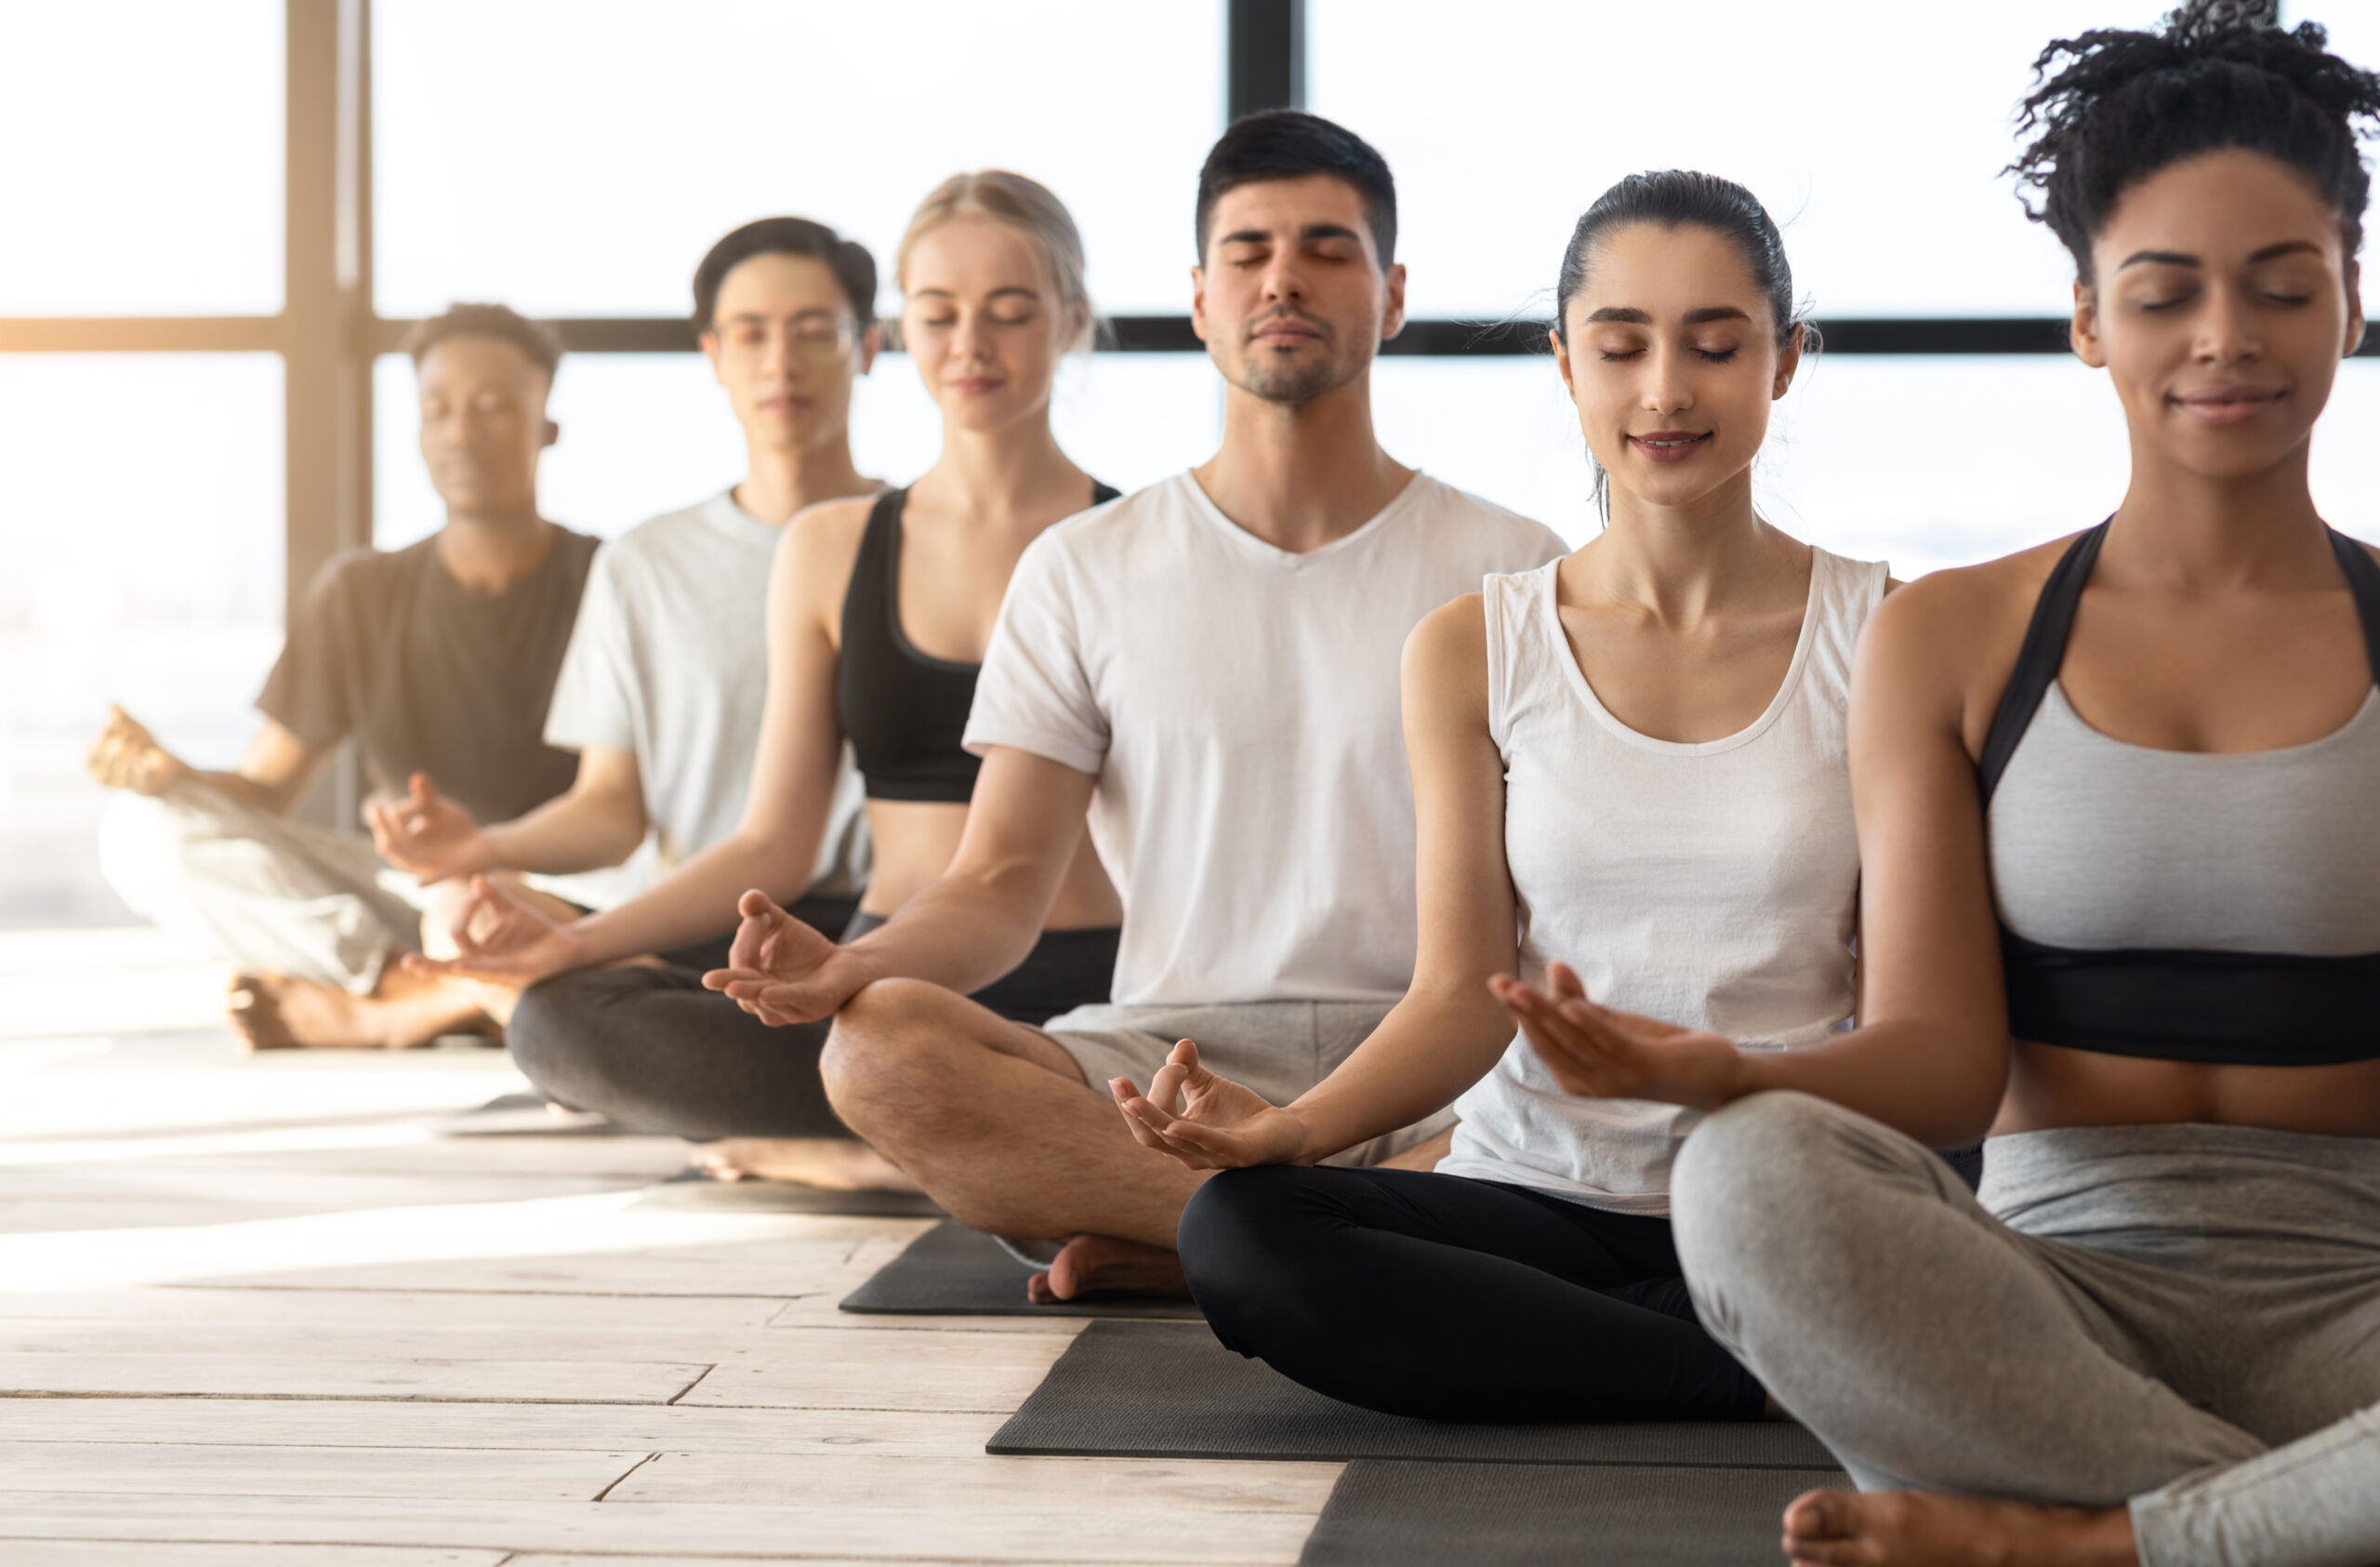 Group Meditation. Sporty Multiracial Men And Women Meditating Together During Yoga Class